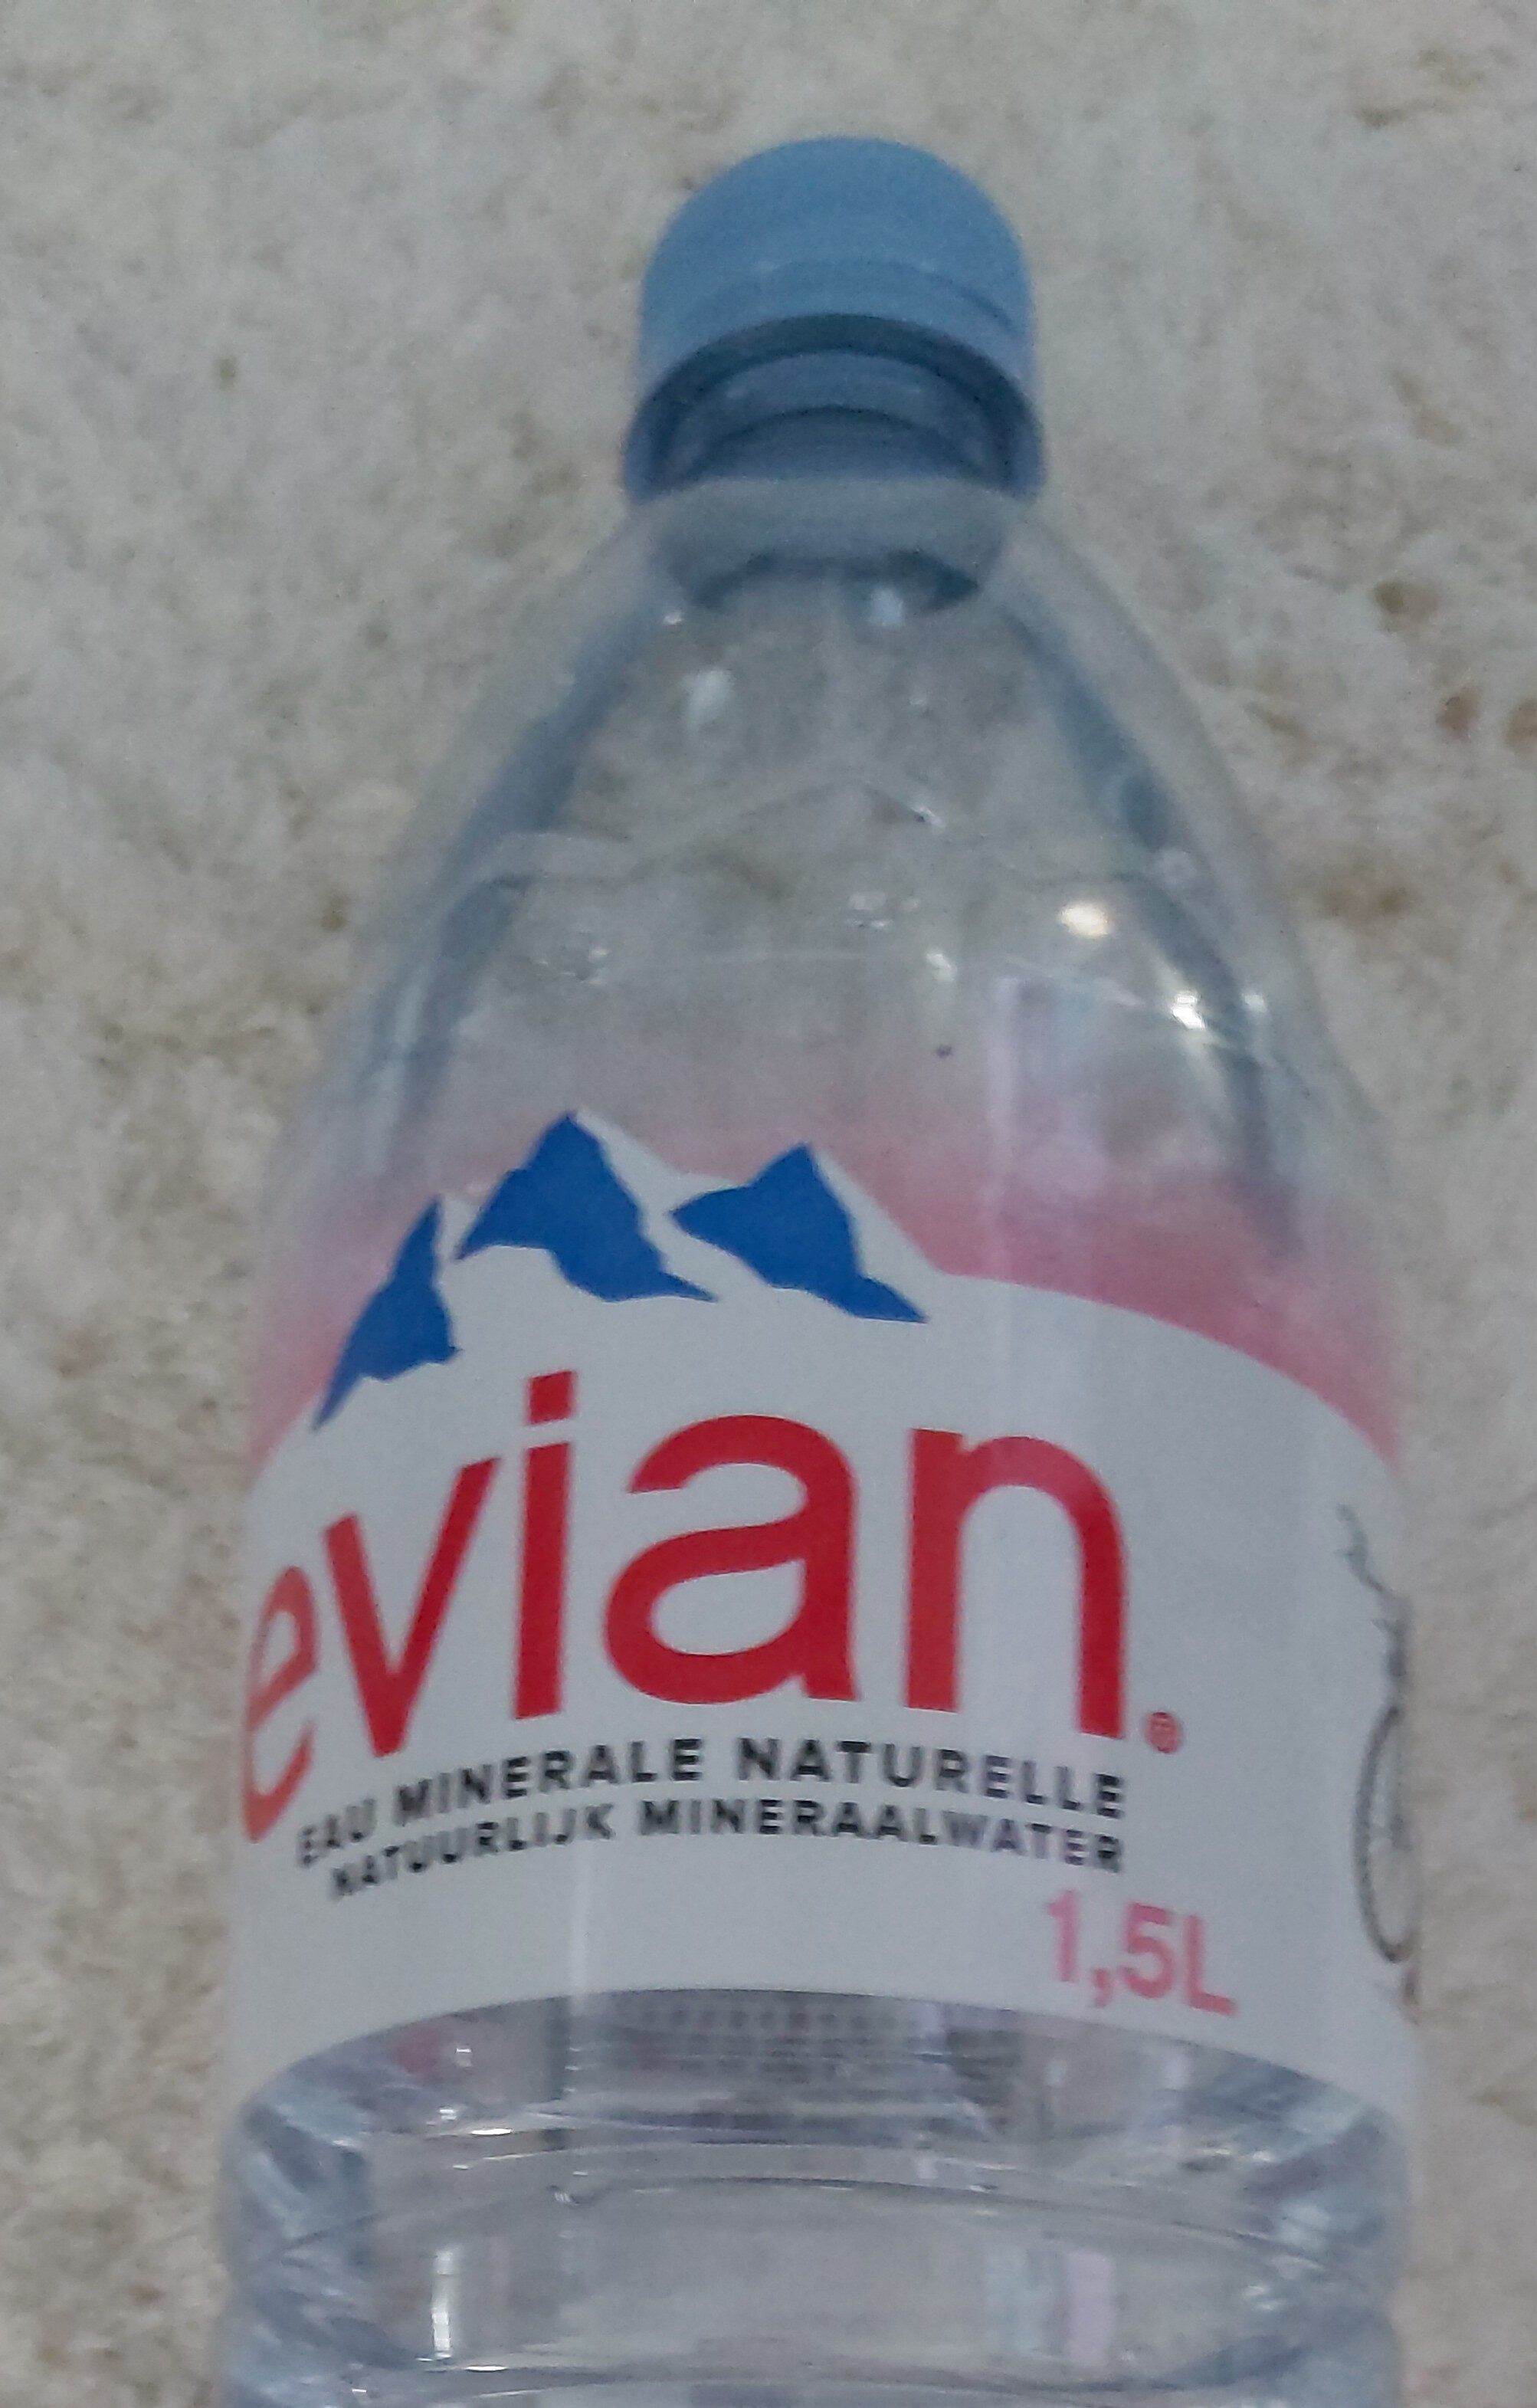 Evian - Product - fr